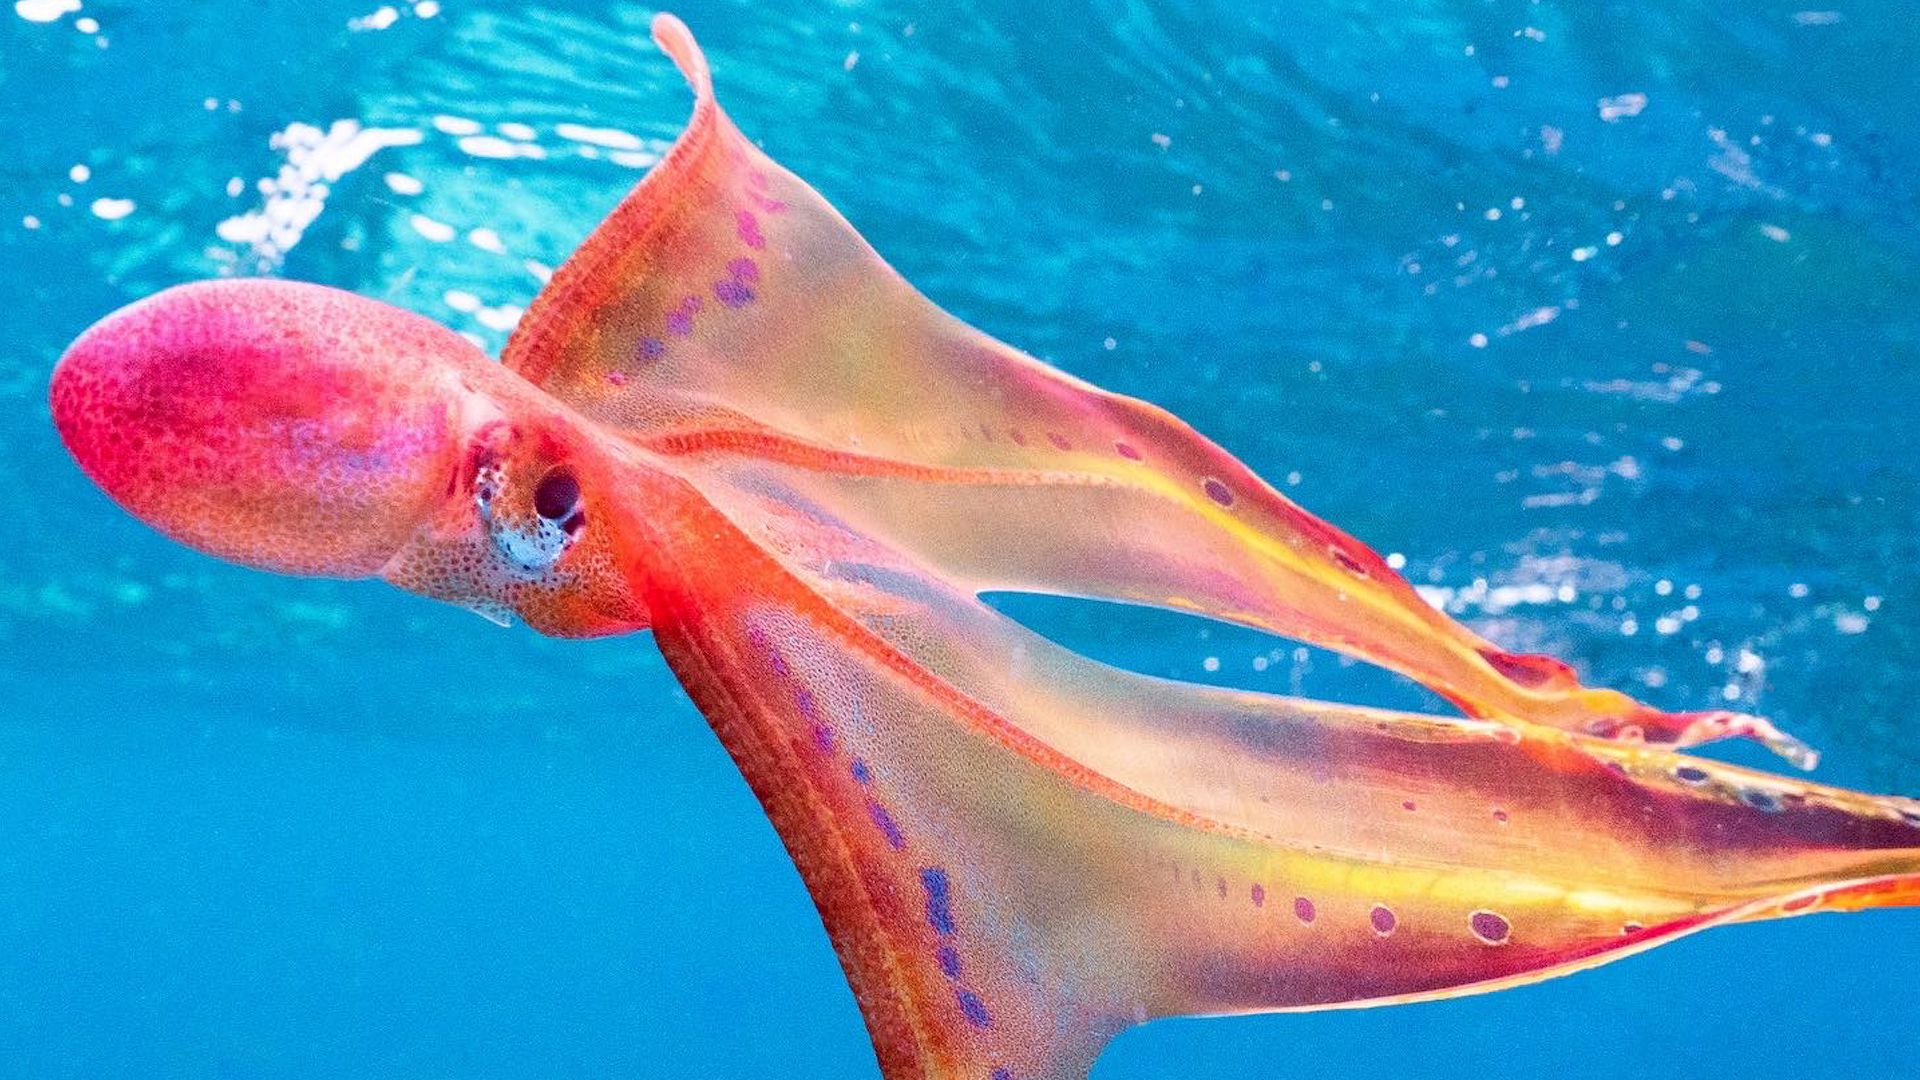 Video: 'Once in a lifetime' rare blanket octopus spotted in